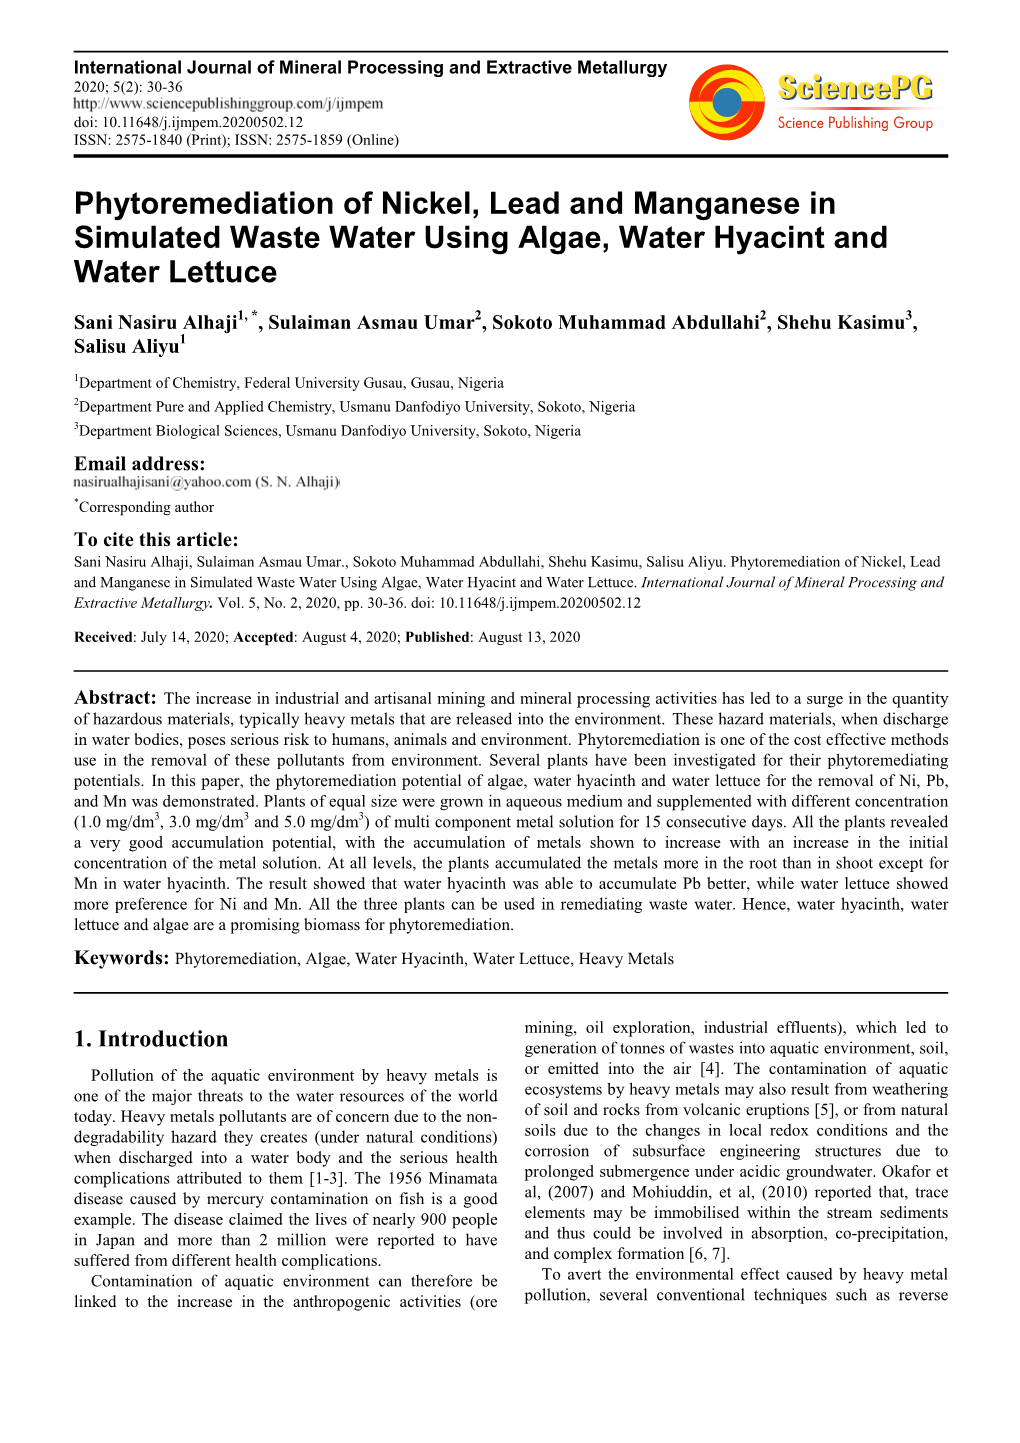 Phytoremediation of Nickel, Lead and Manganese in Simulated Waste Water Using Algae, Water Hyacint and Water Lettuce